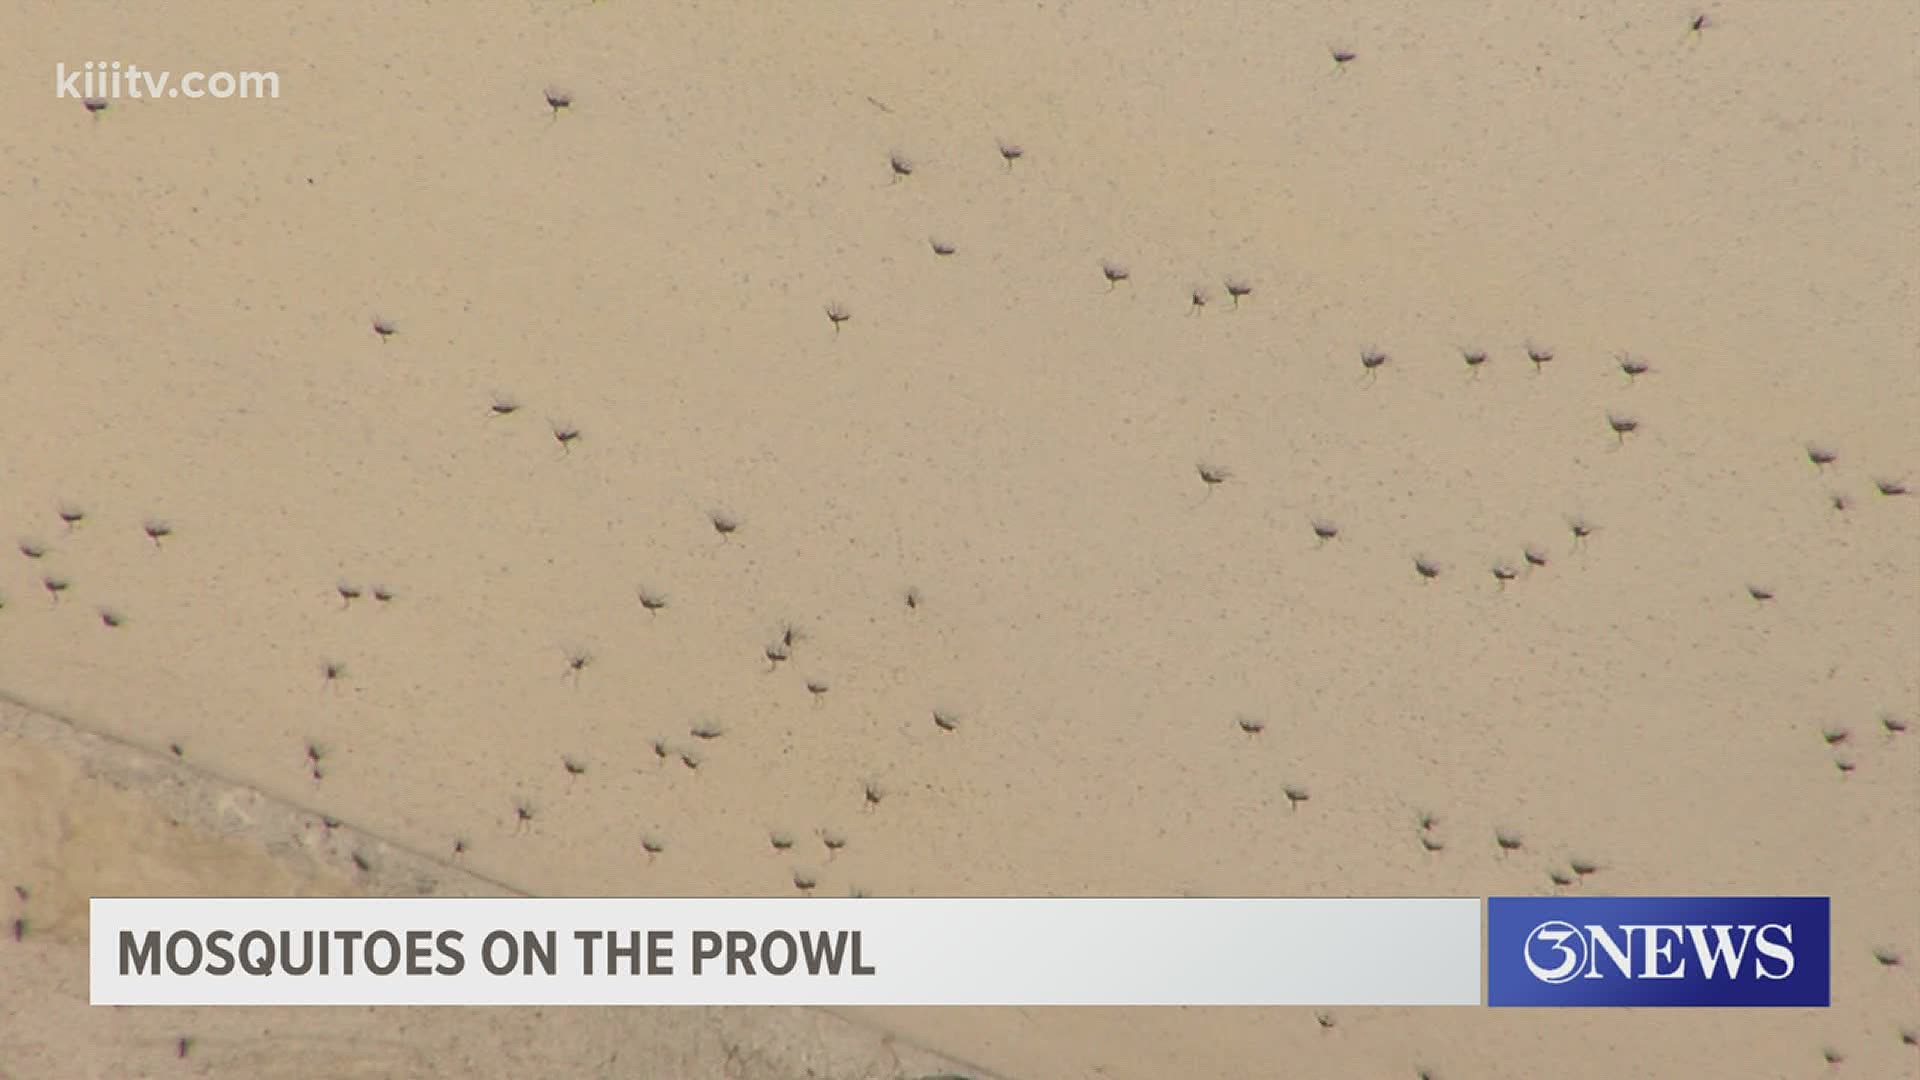 A Nueces County resident said she and her family can't go outside during wet season because the mosquitoes are so bad.